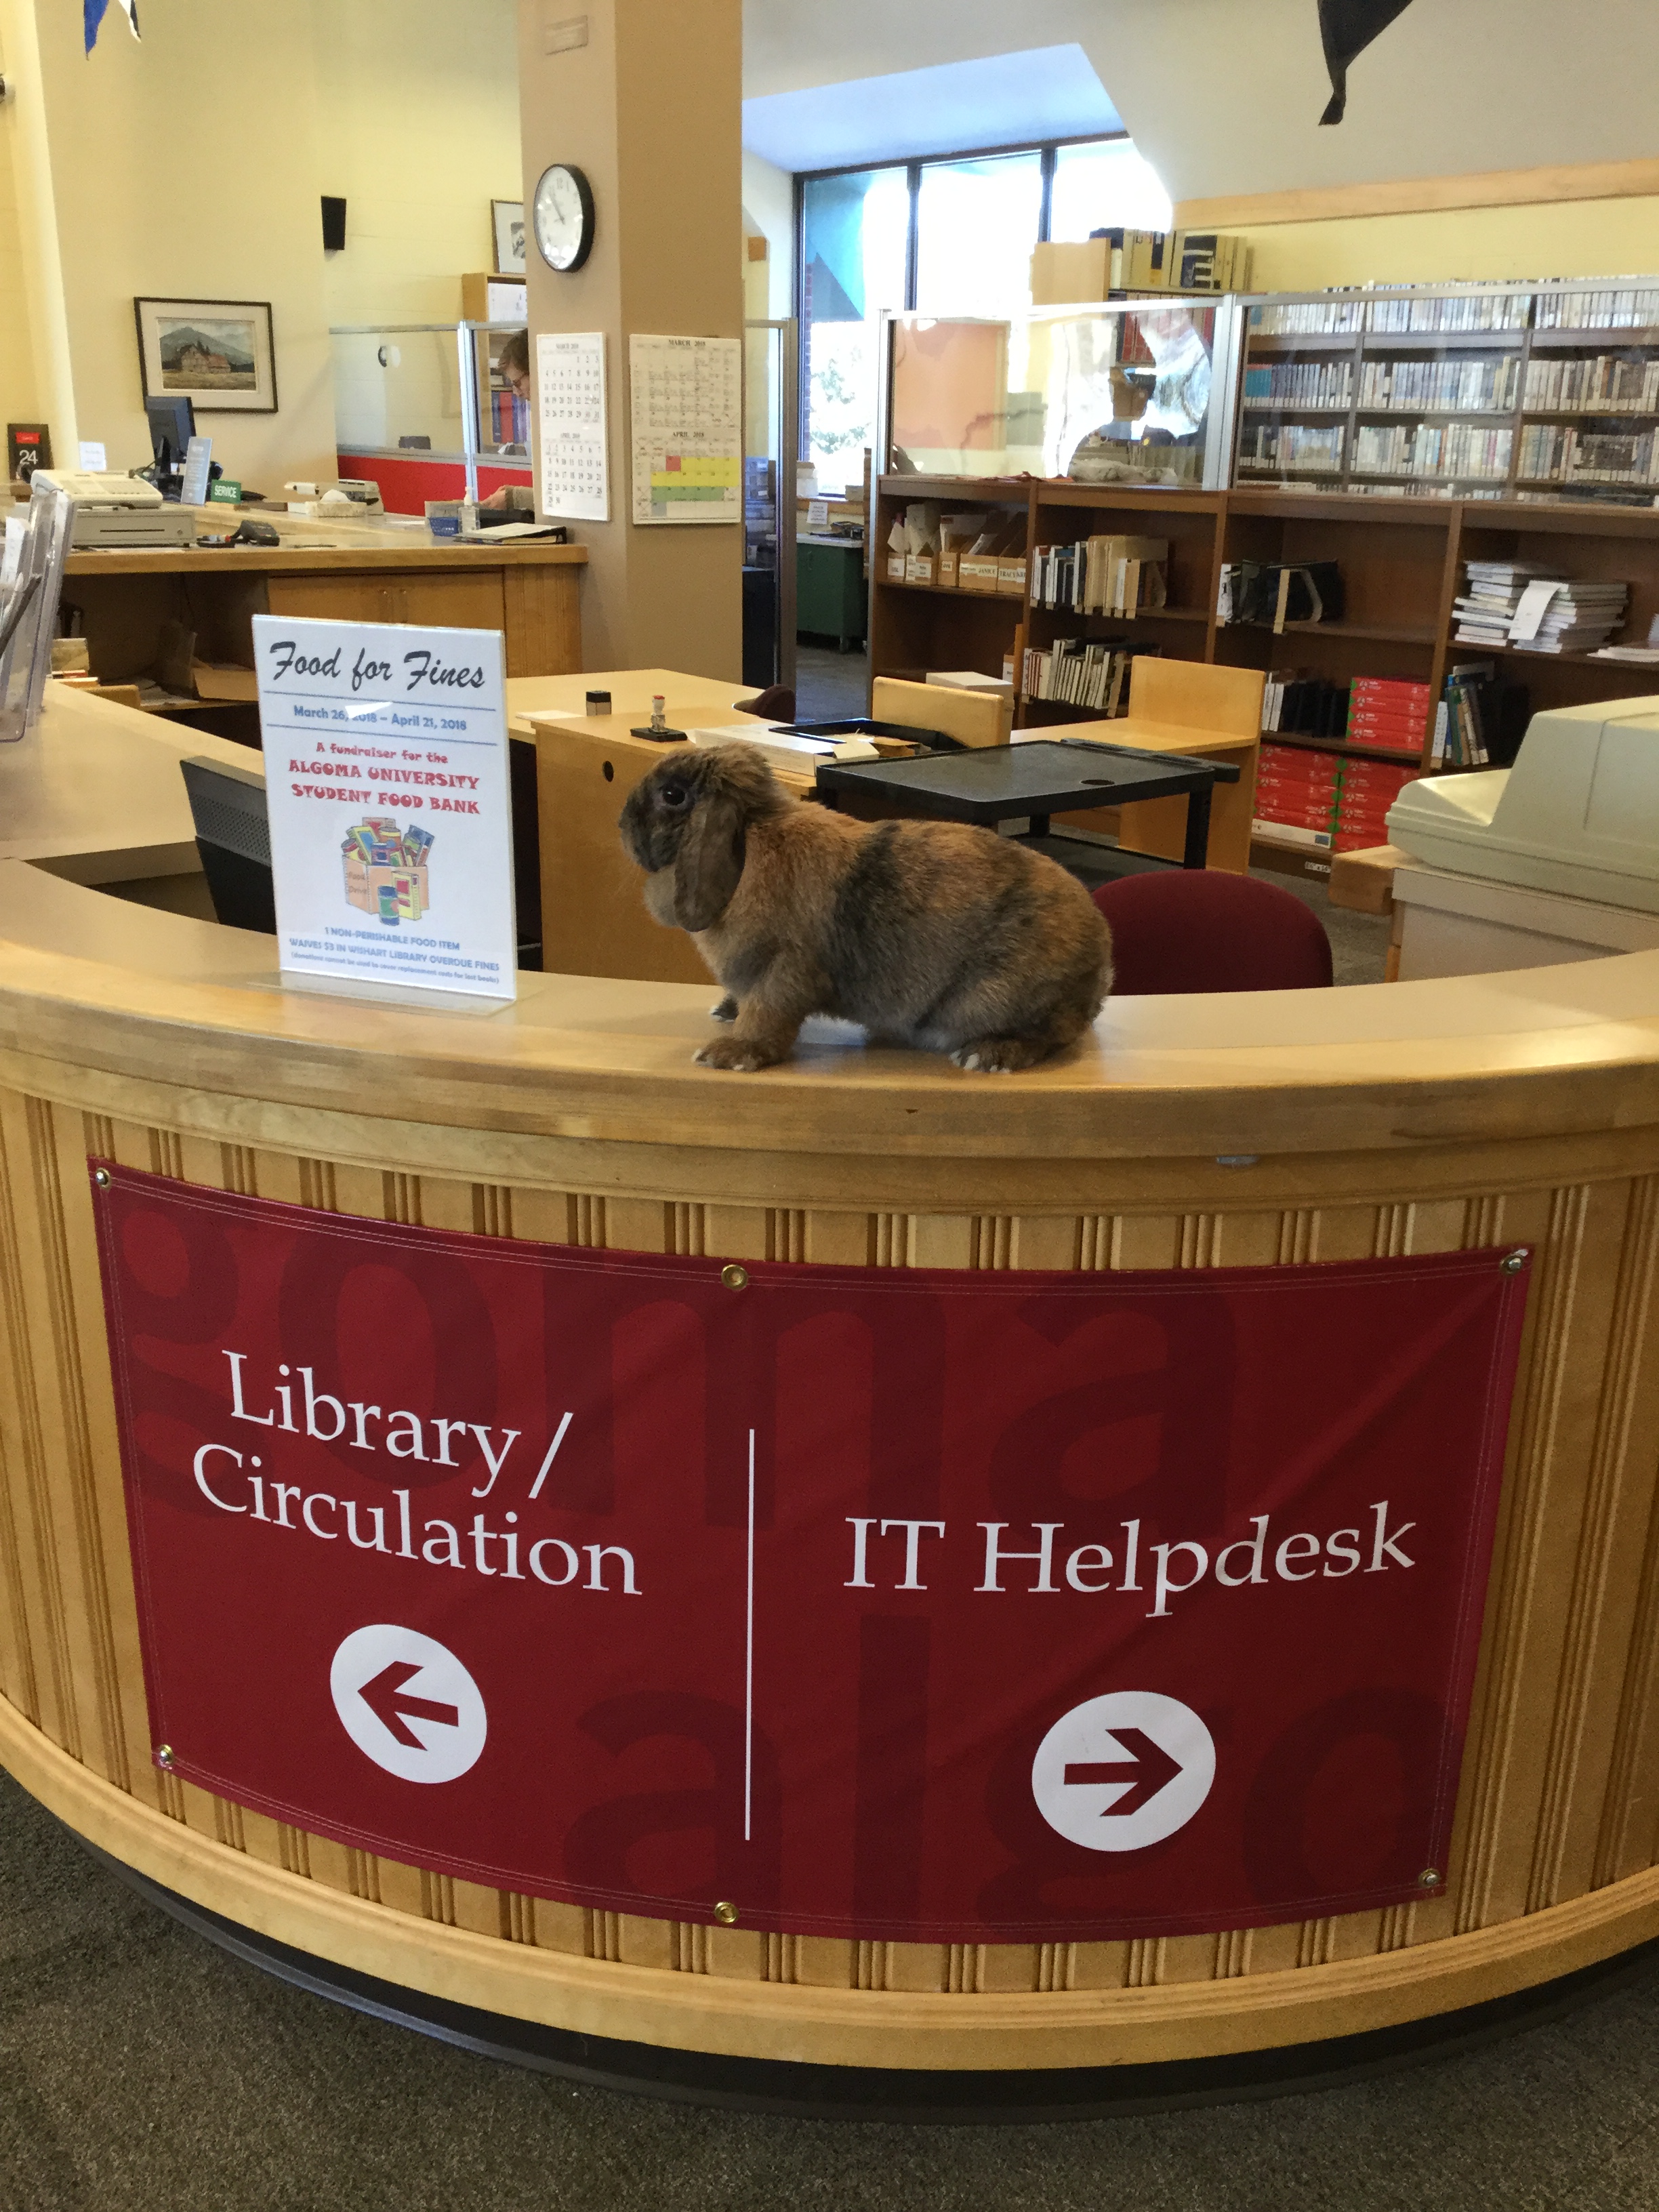 Library Services Desk